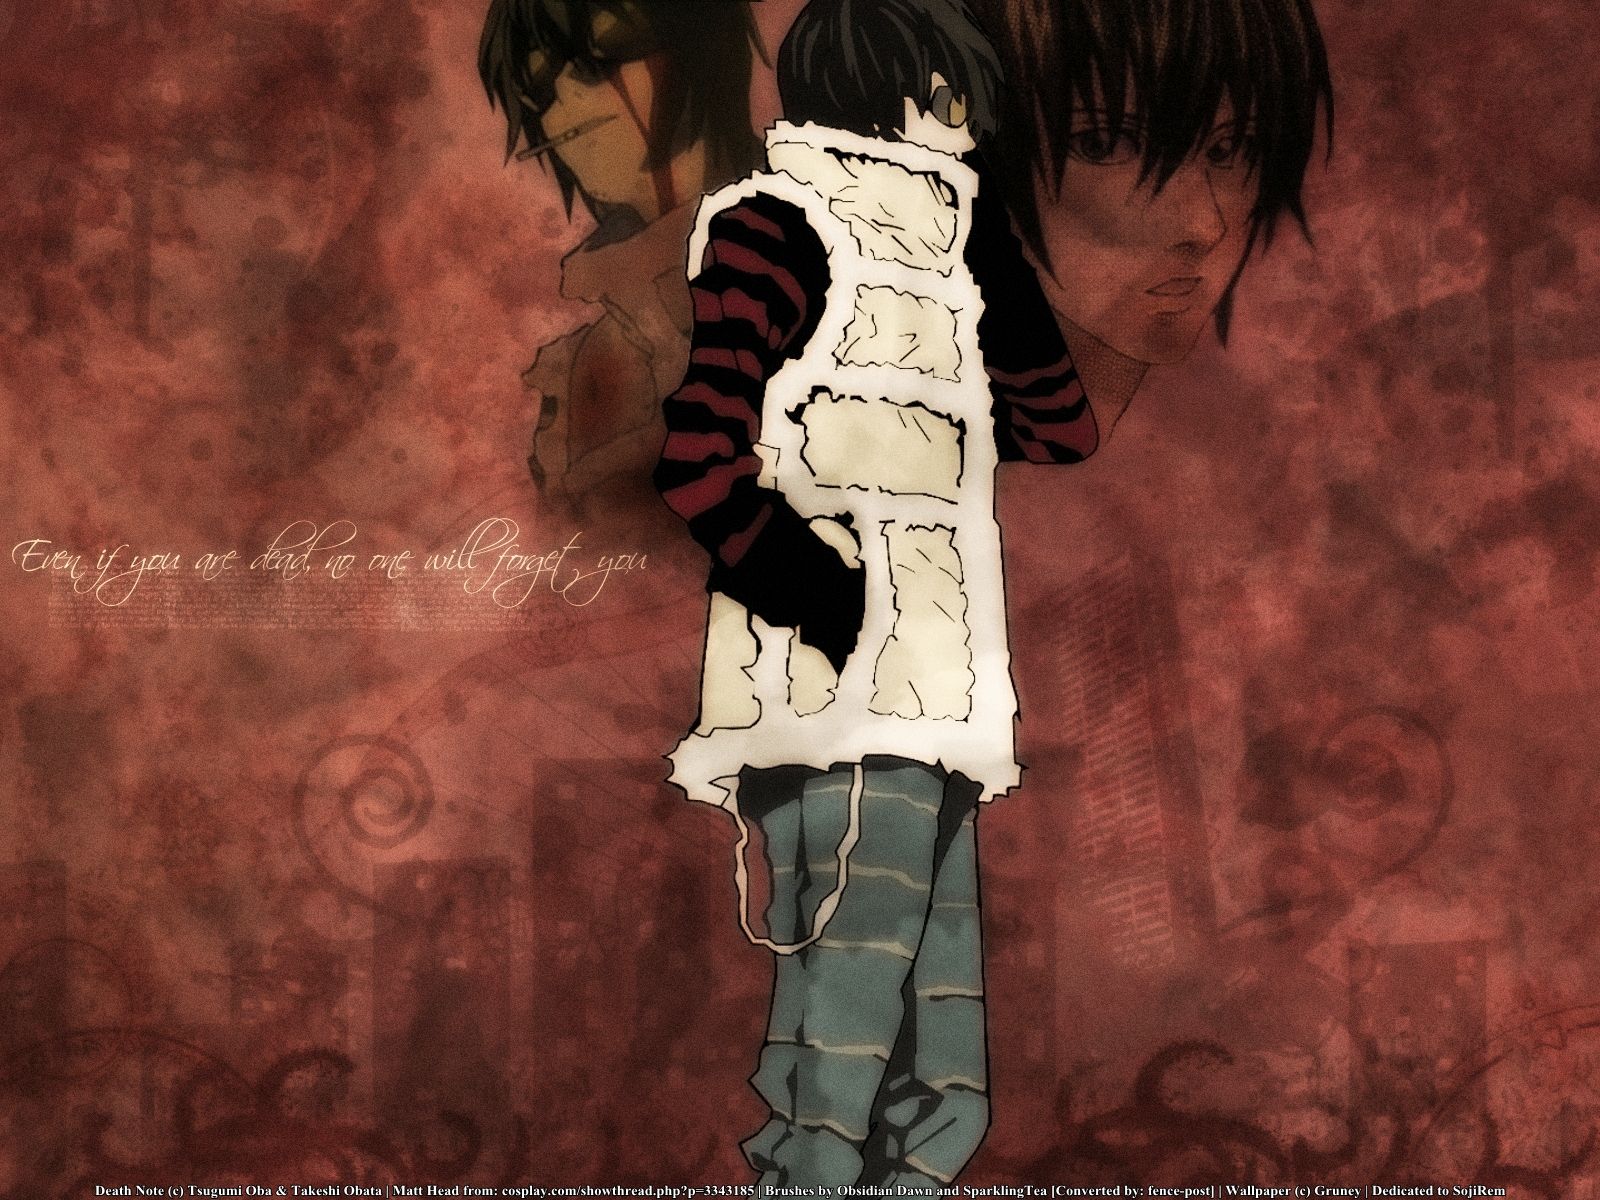 Death Note Wallpaper: Even if you are dead